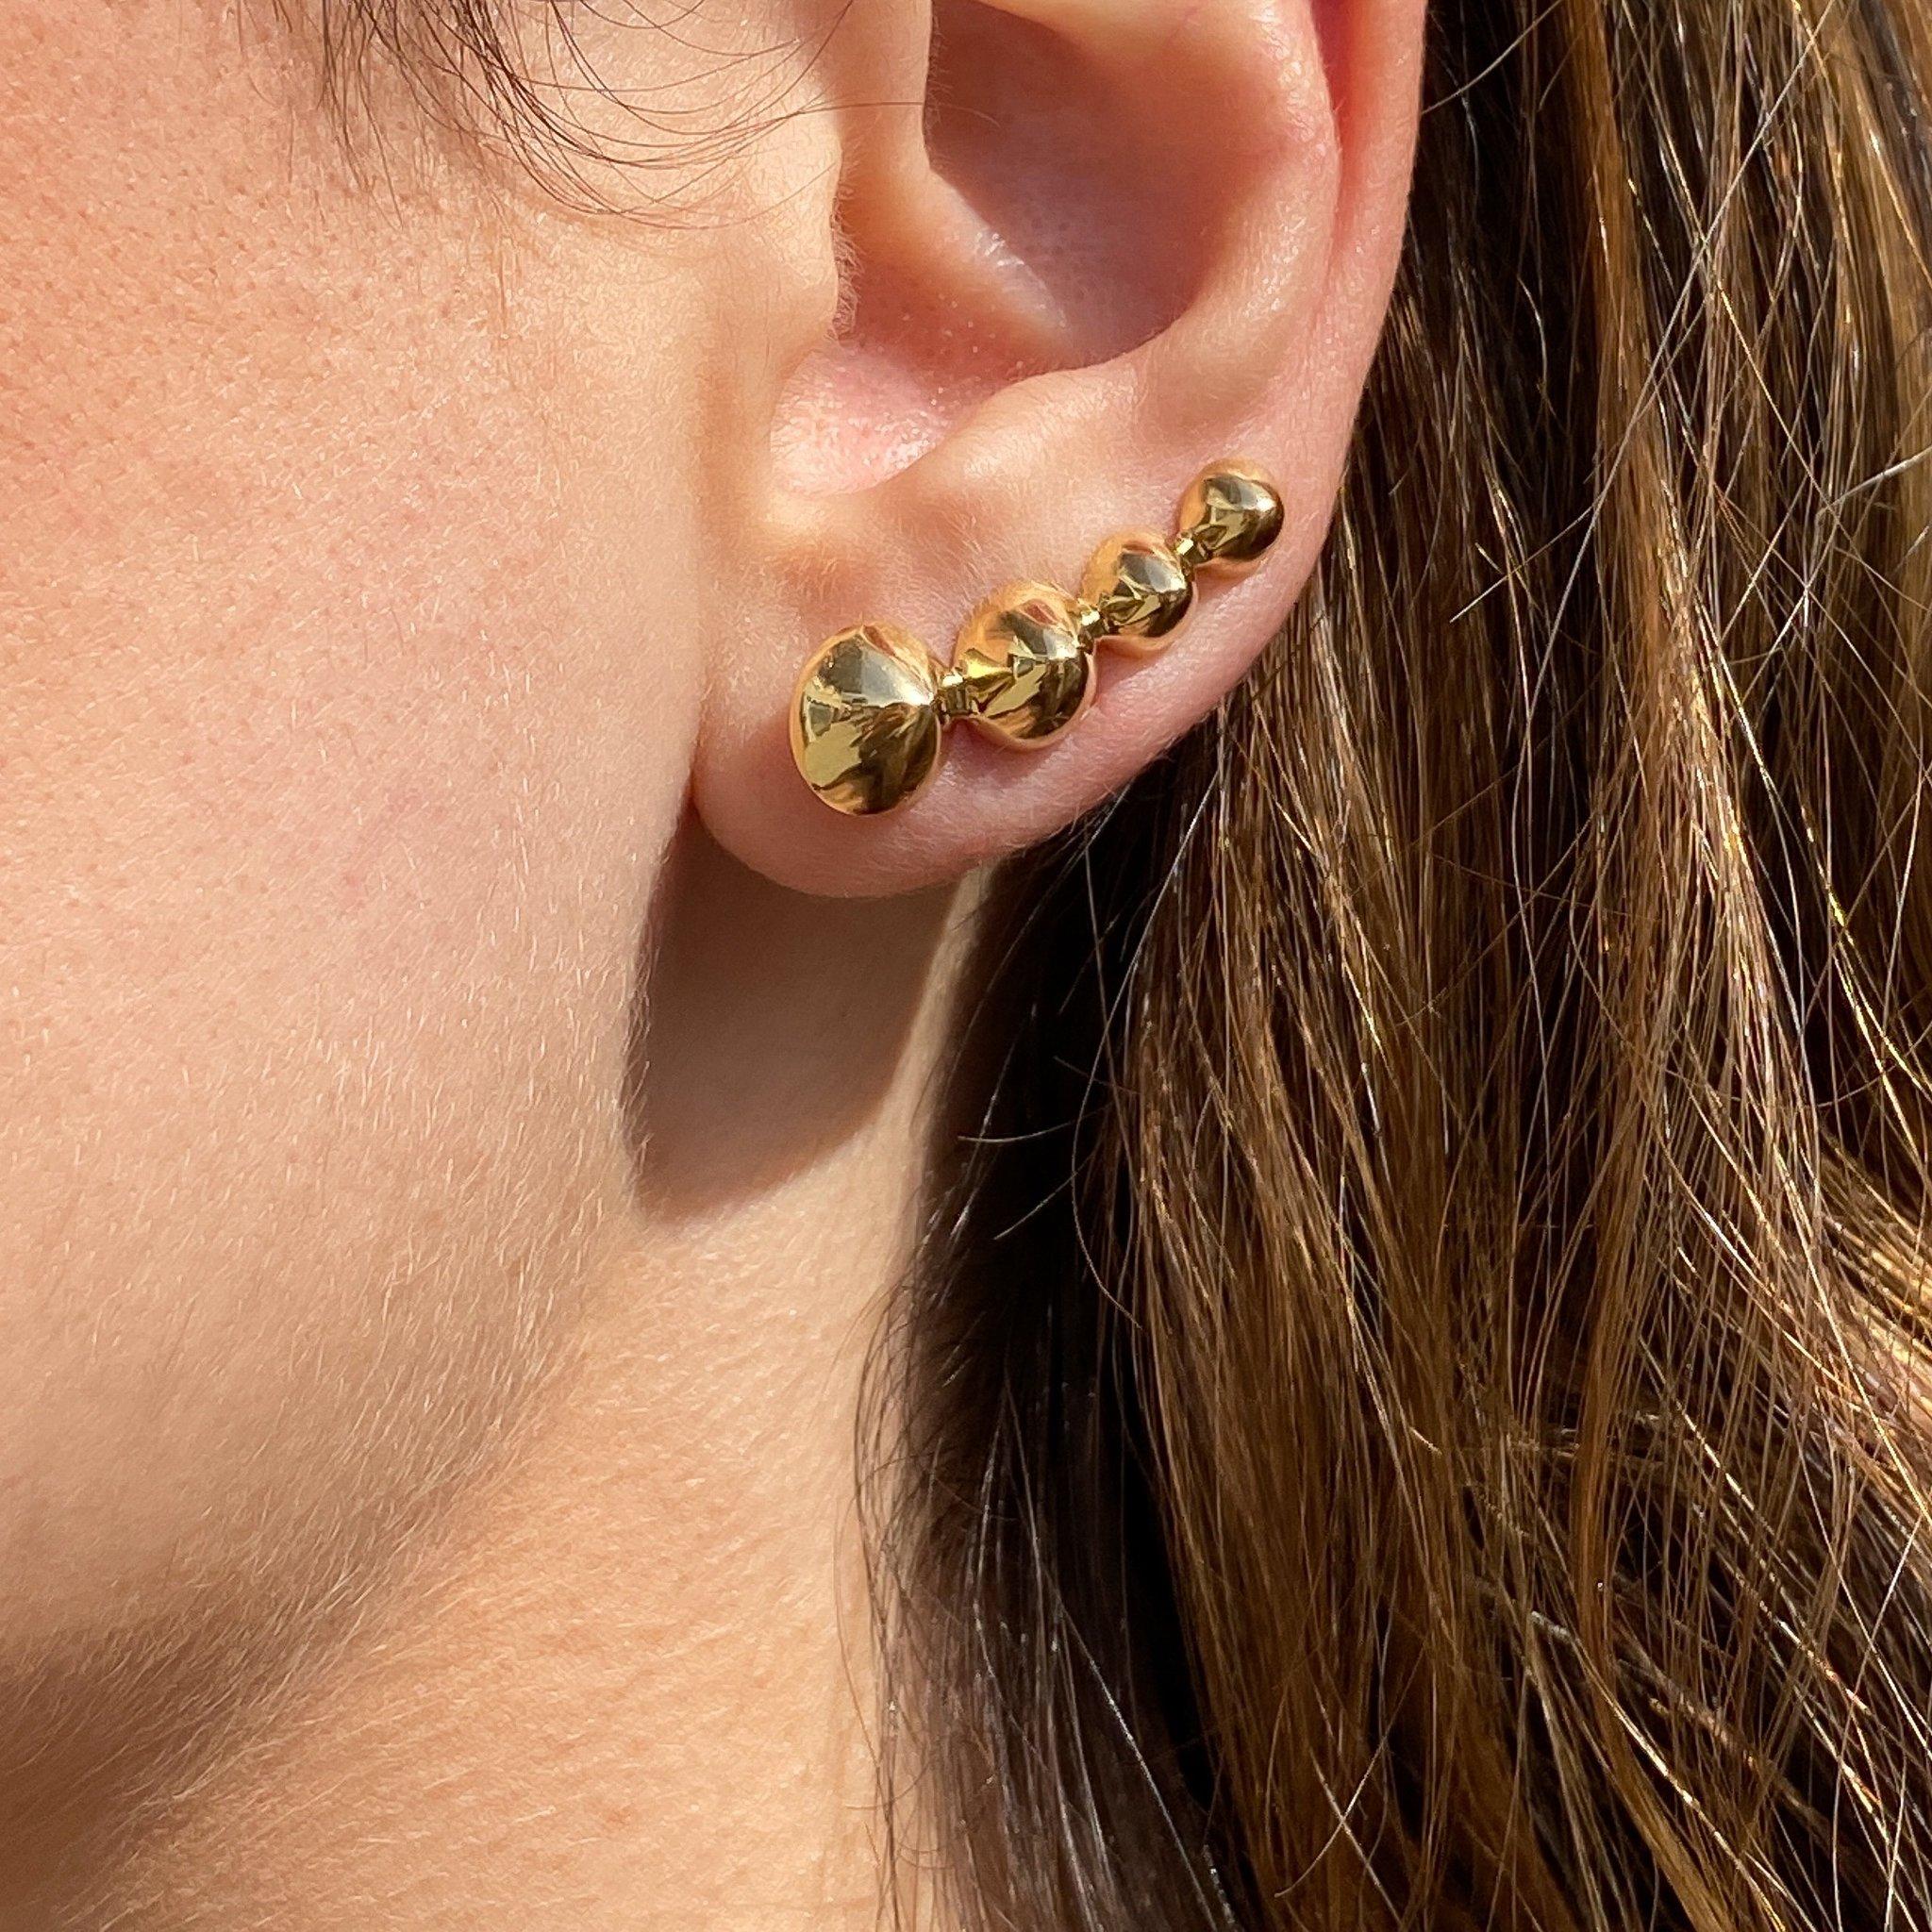 The ‘Spiked’ ear climbers are hand sculpted and crafted in 18K yellow gold, hallmarked in Cyprus. These impressive ear climbers, come in a highly polished finish and are very easy and comfortable to wear. They are securely held in place with a